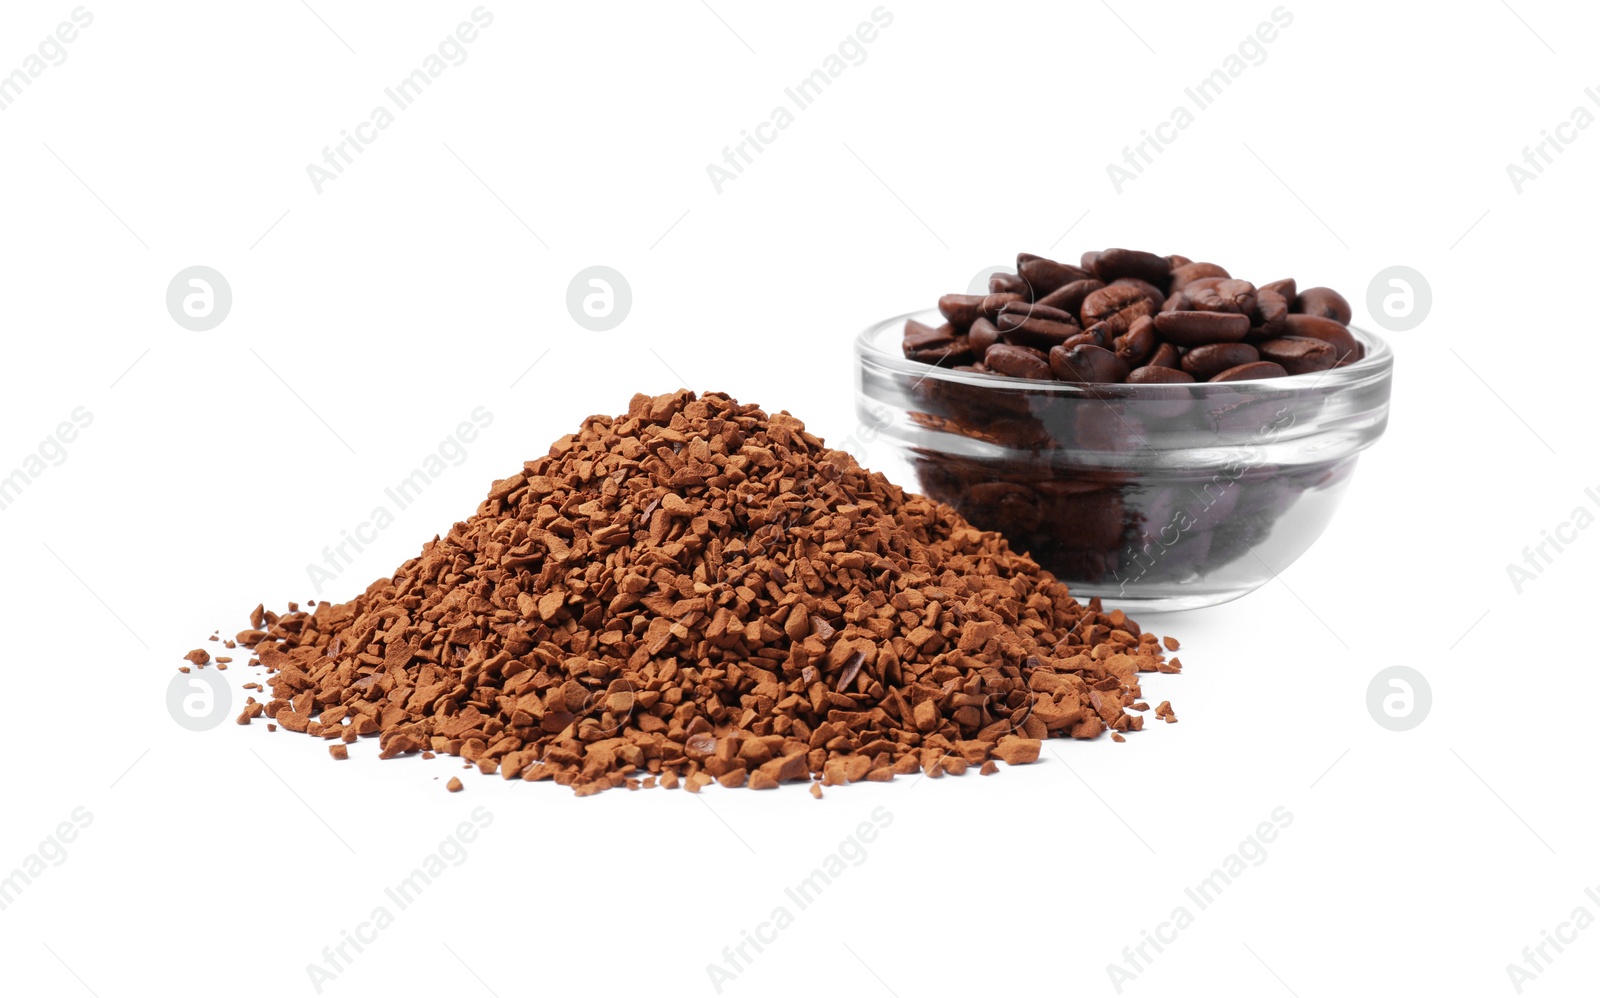 Photo of Heap of instant coffee and glass bowl with beans on white background